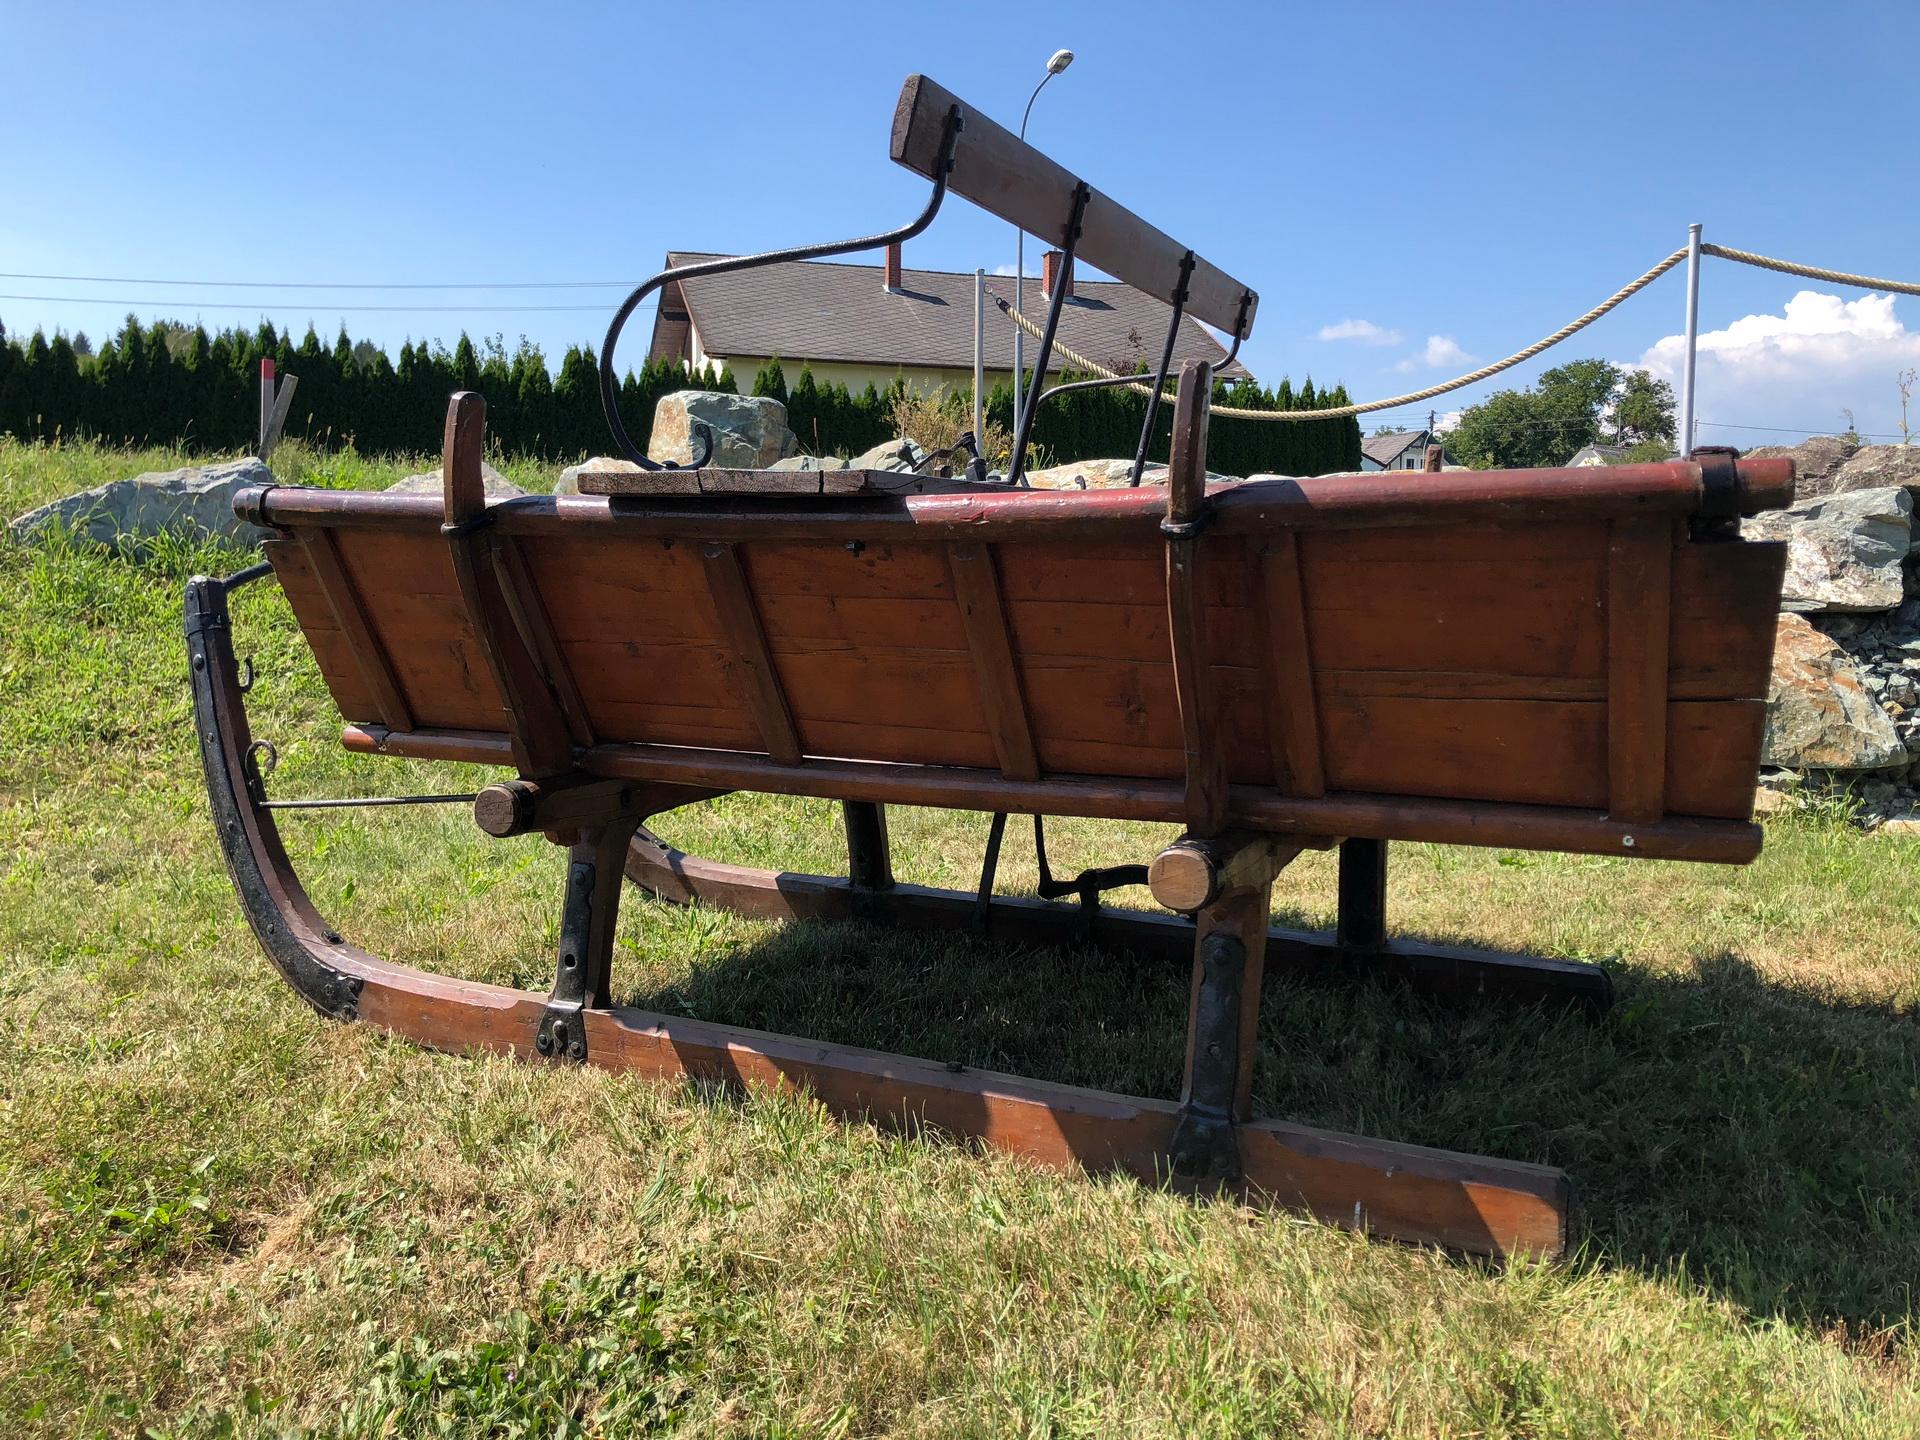 Pretty well-maintained sleigh from the Tyrol area in Austria, build, circa 1920.

This is an old Tyrolean sledge made of wood, very good condition and with metal fittings.

It is very well preserved and can still be used for its original